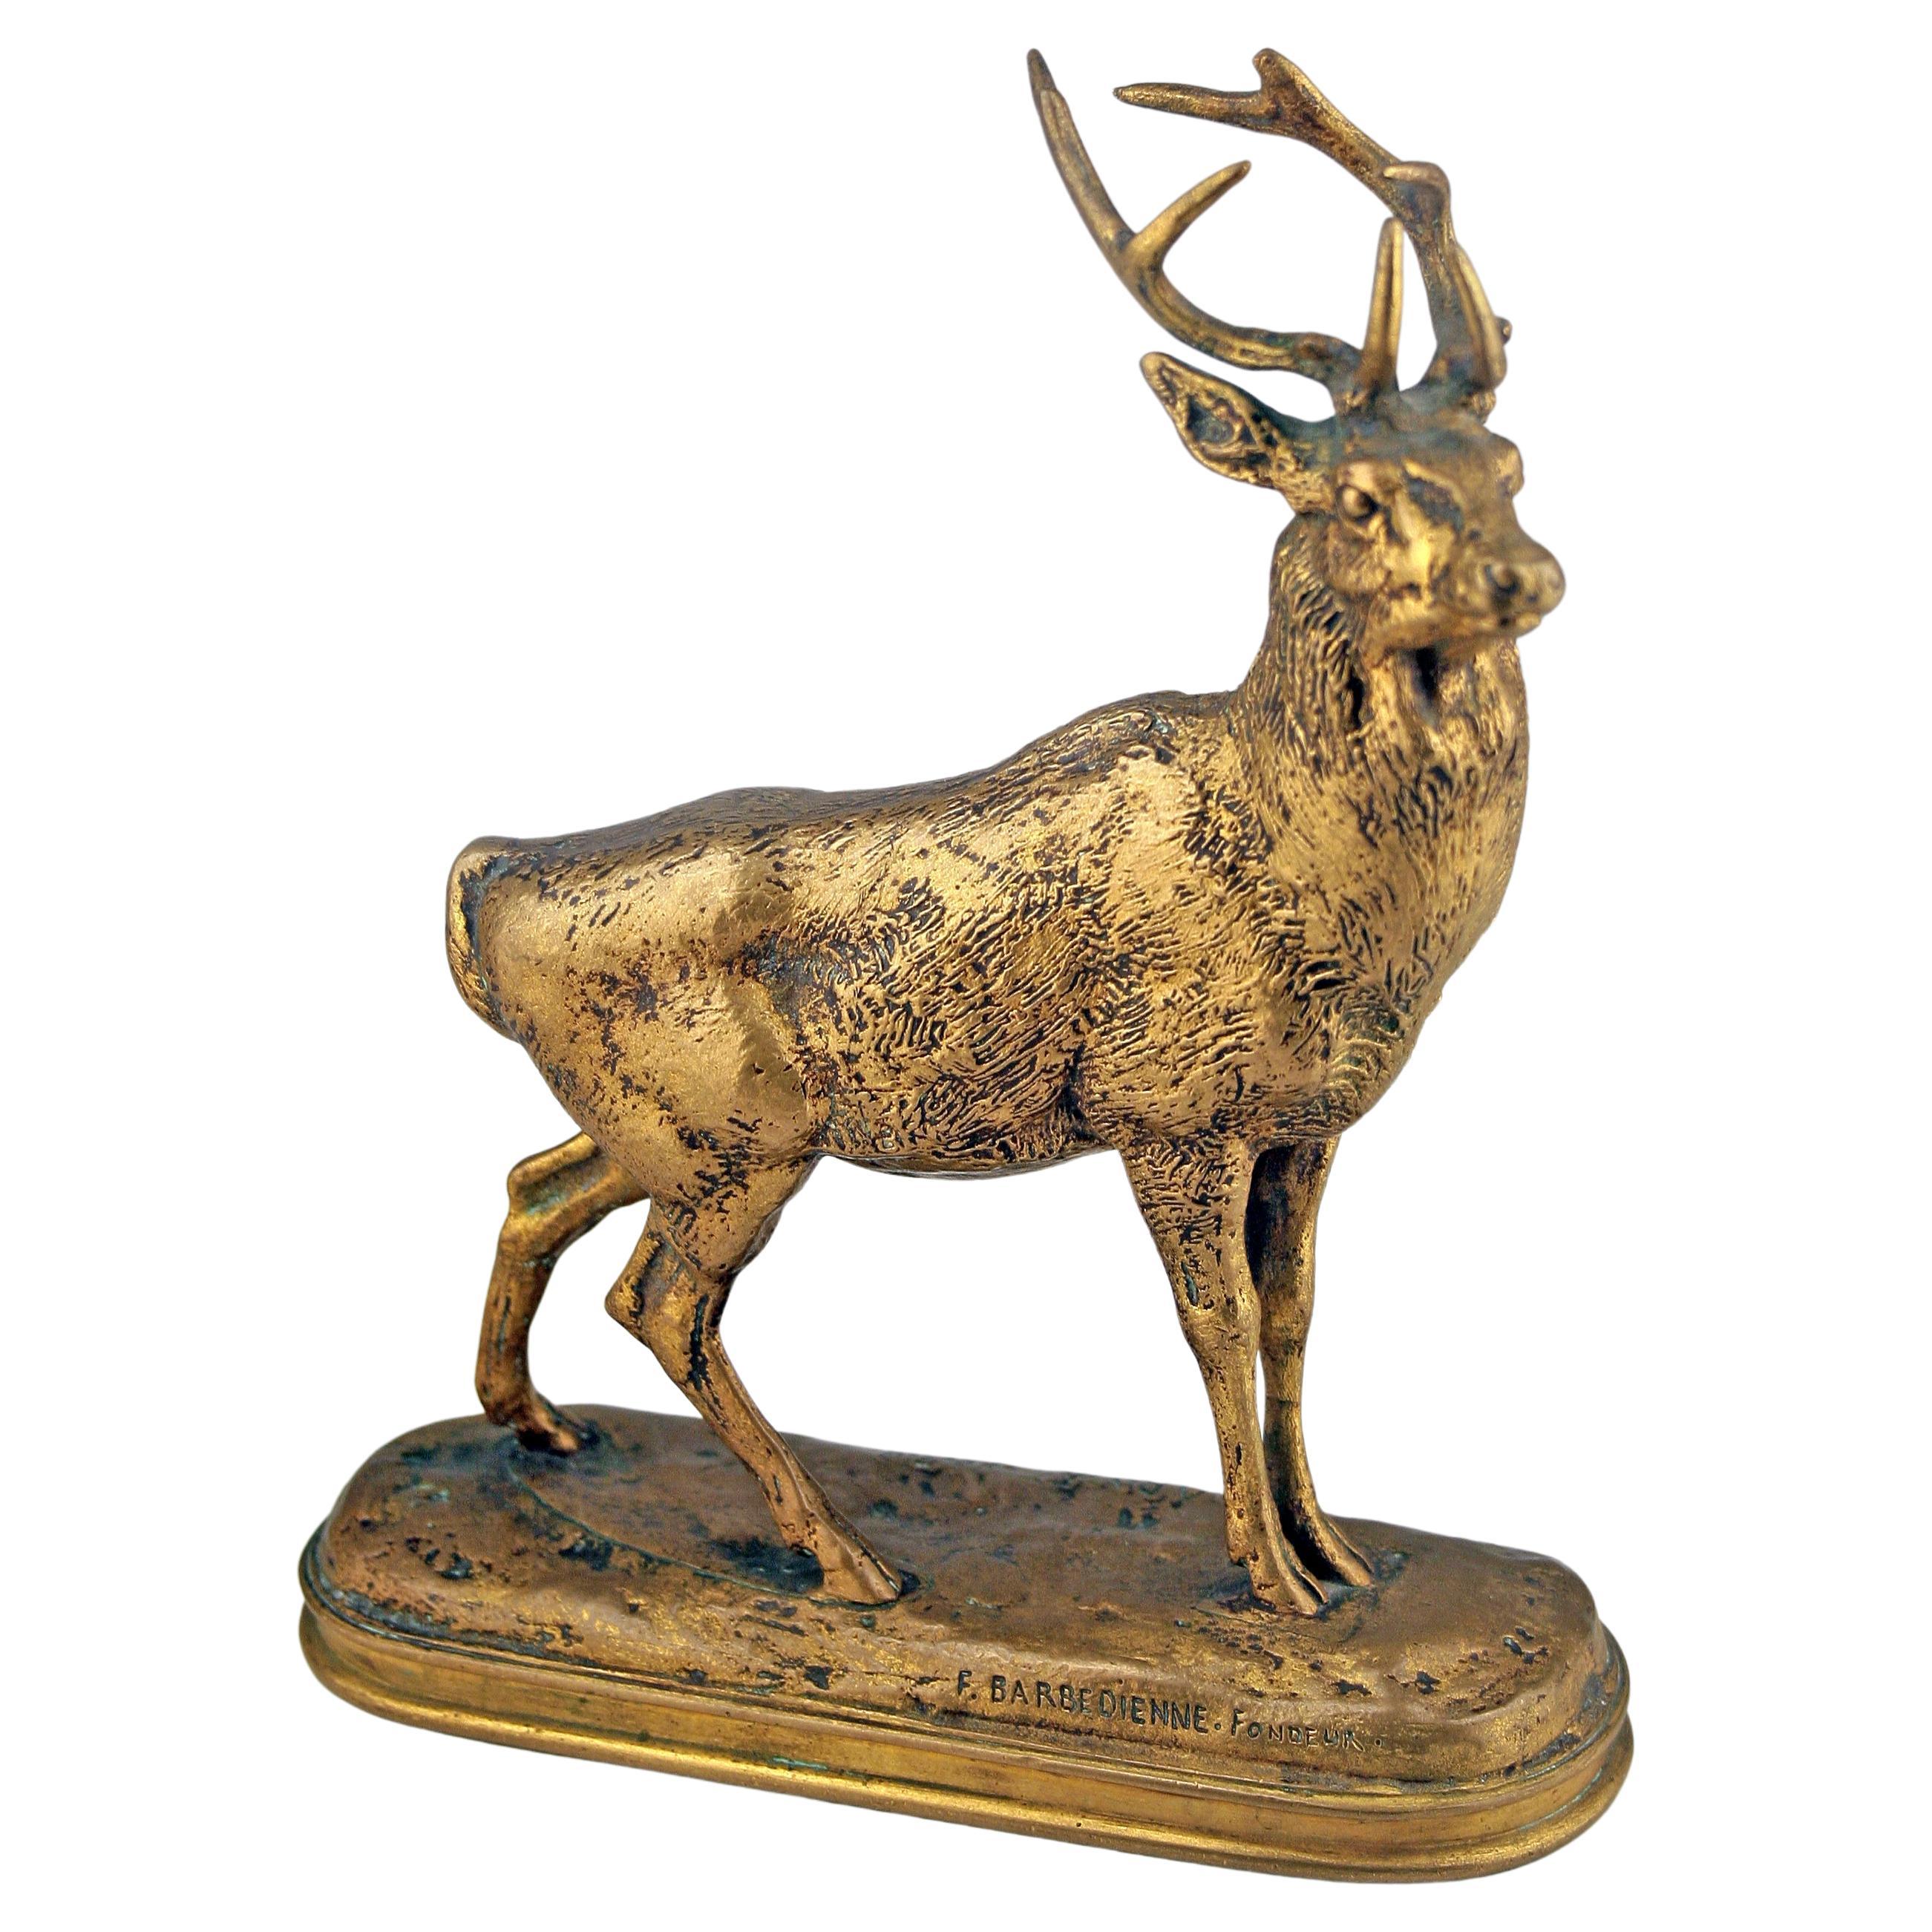 'Listening Stag' by Romantic Author A.L. Barye Produced by Barbedienne in Bronze For Sale